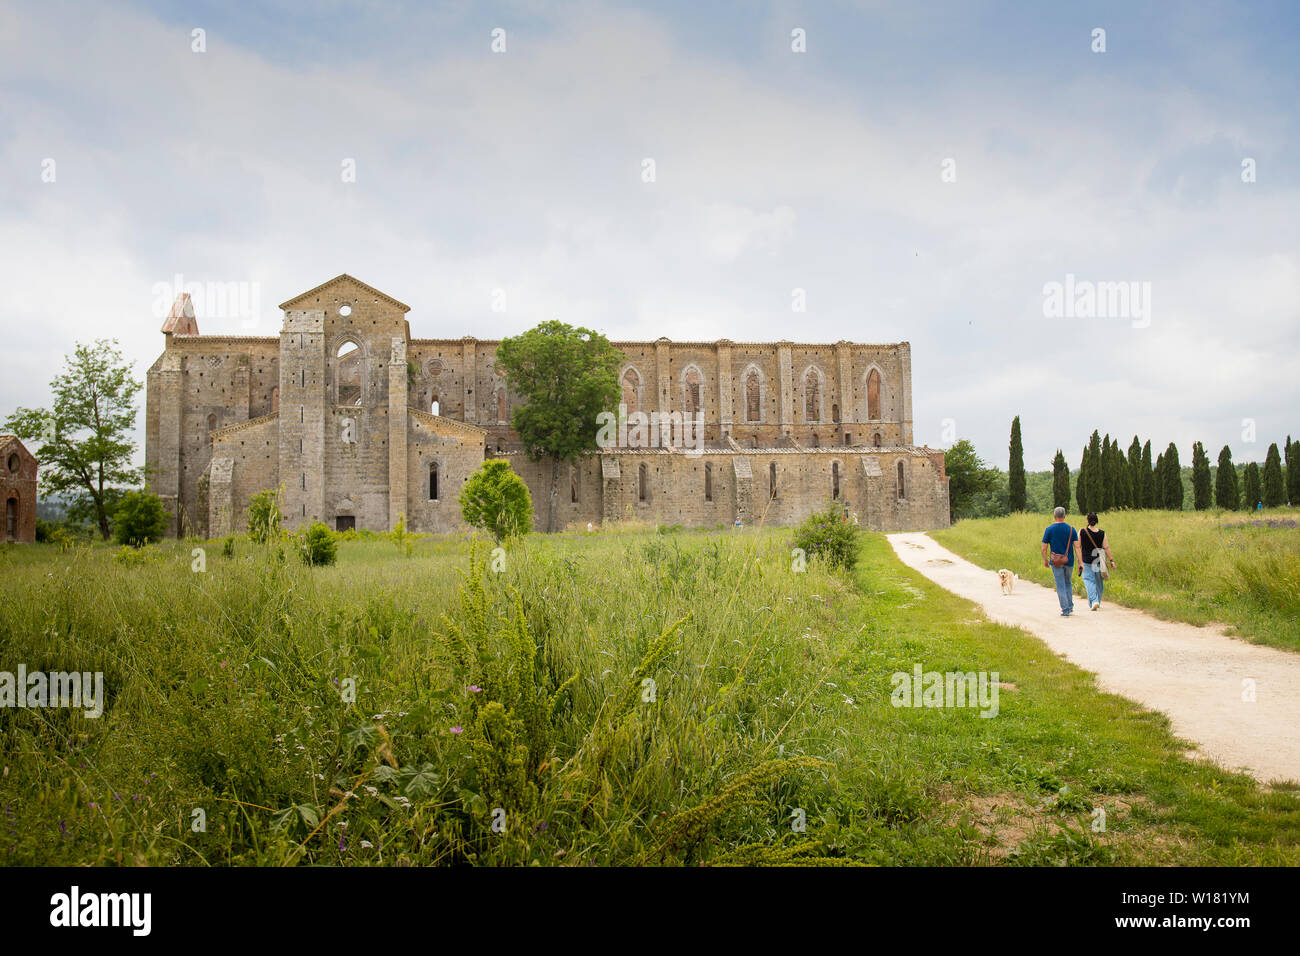 View of san galgano abbey from outside with two people walking towards the abbey. People are not recognizable.Tuscany, Italy. Stock Photo